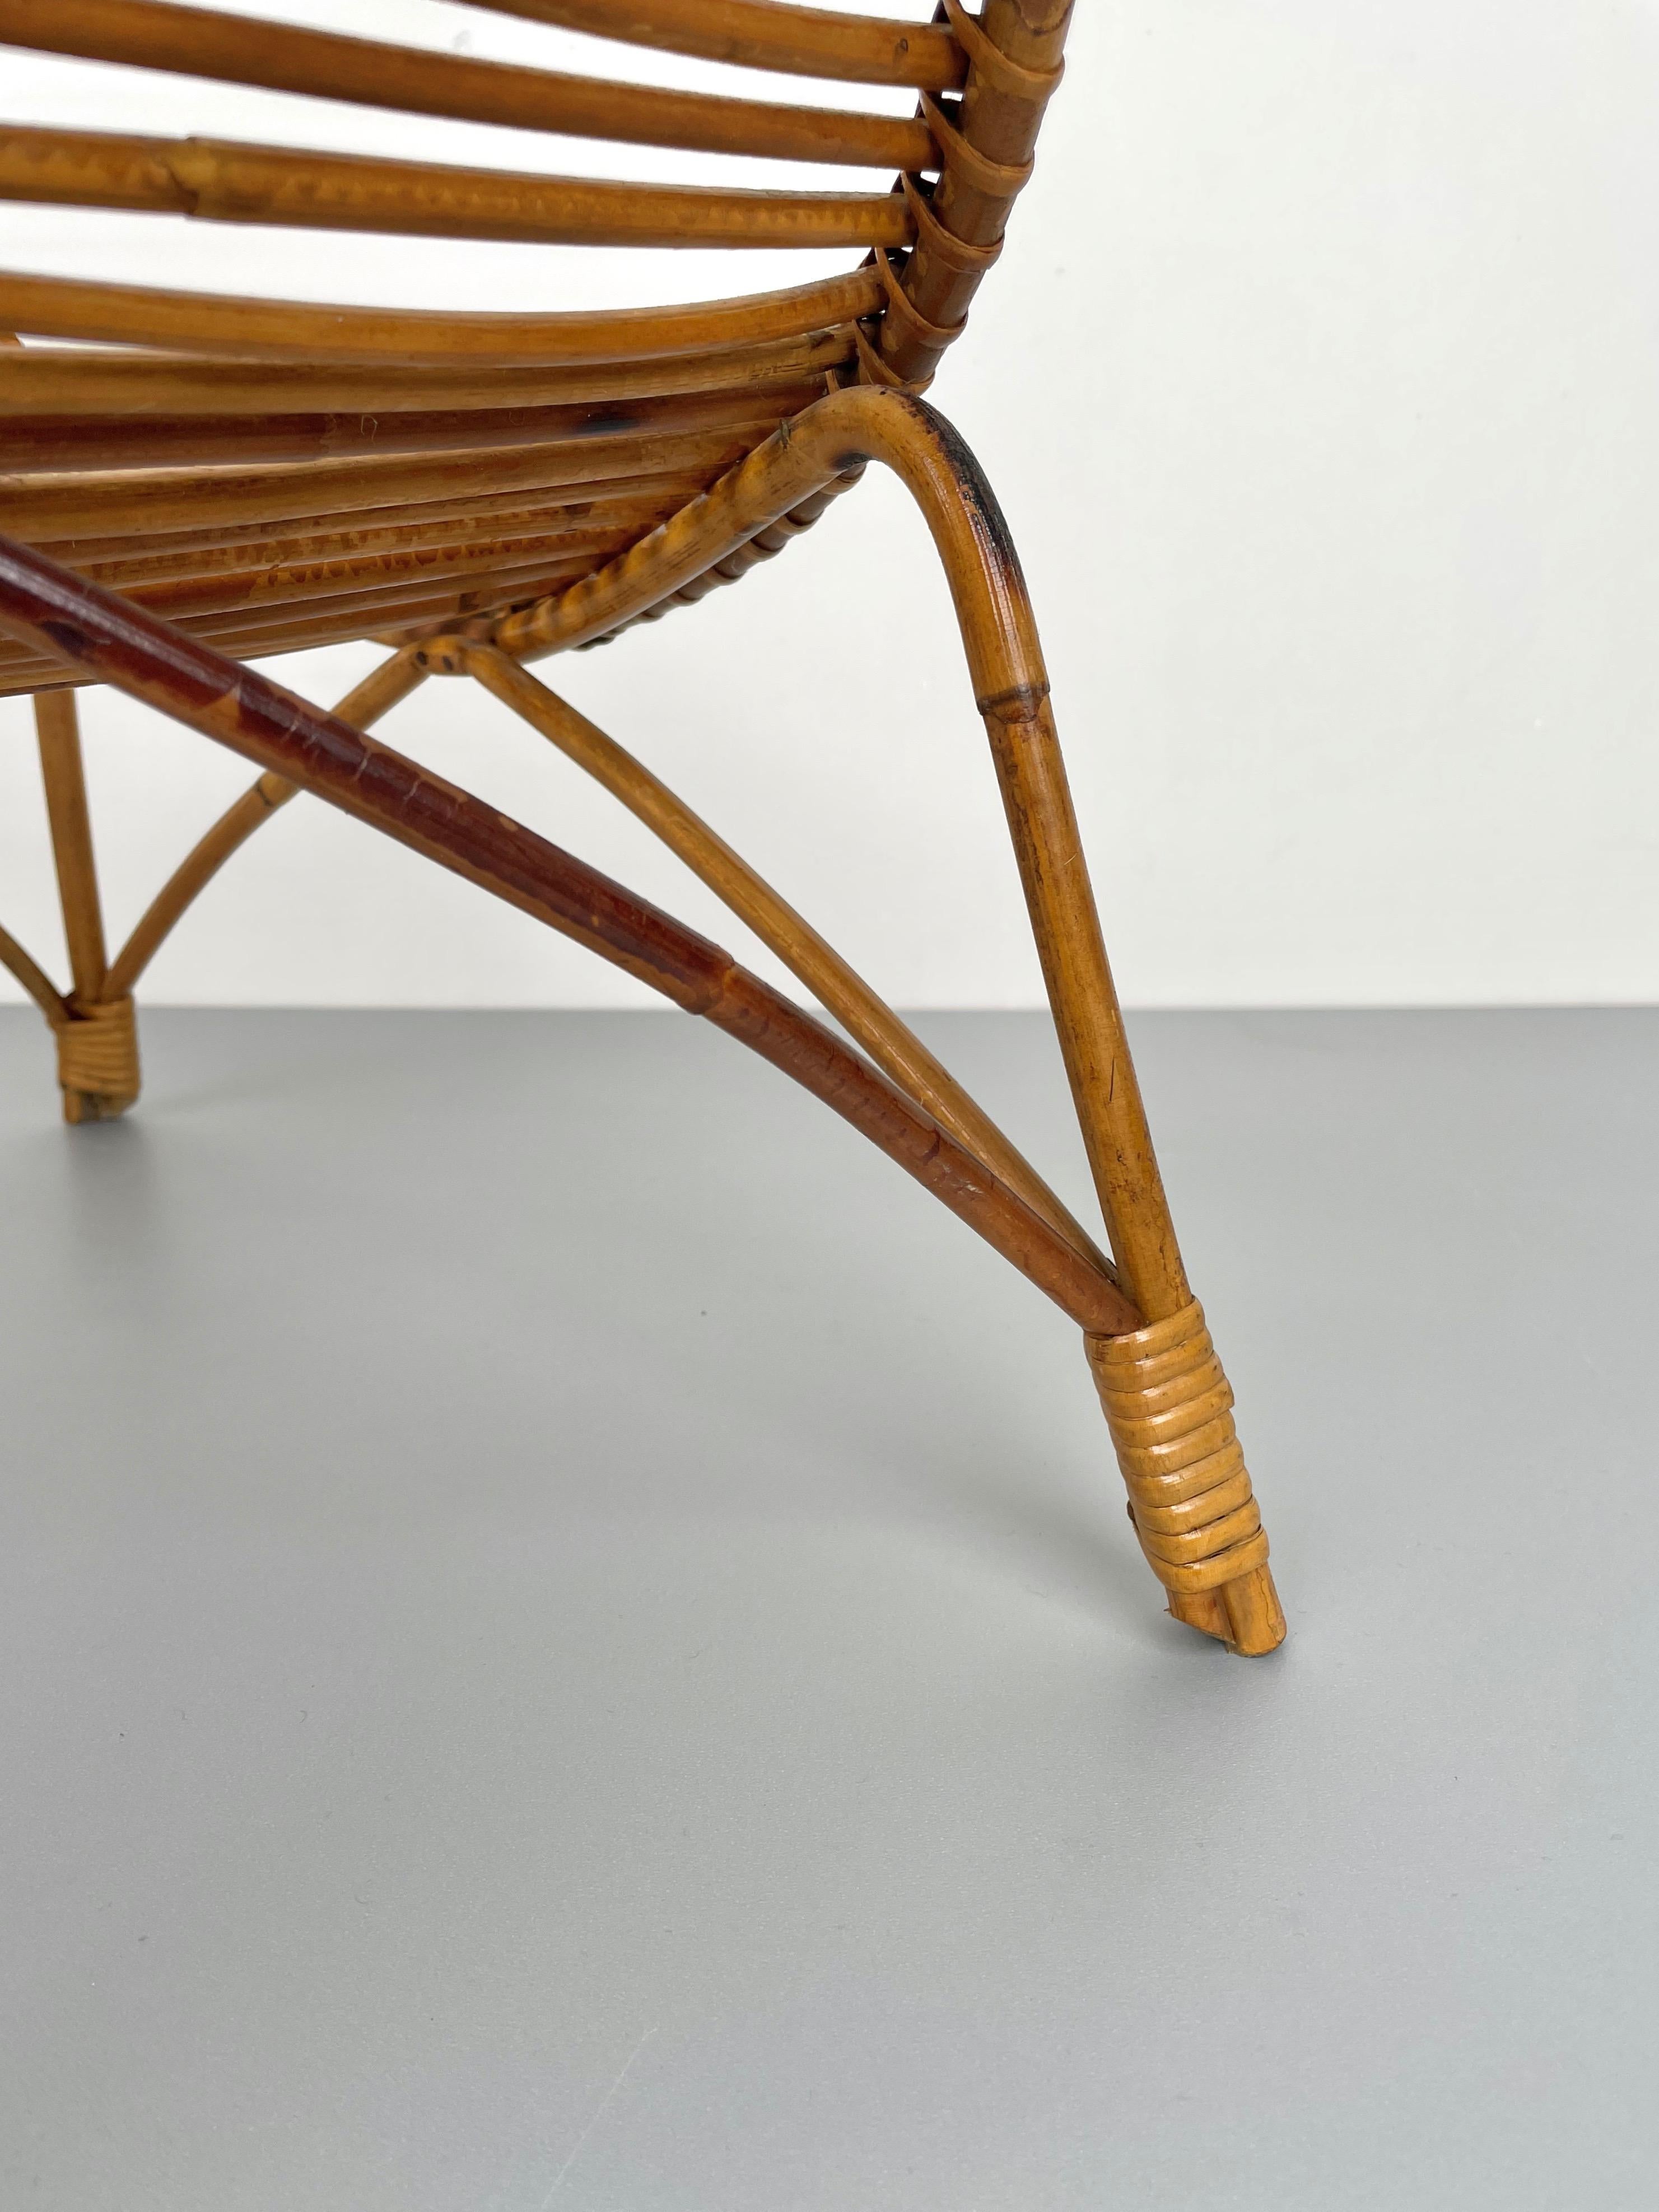 Rattan & Bamboo Curved Magazine Rack, Italy, 1960s For Sale 8